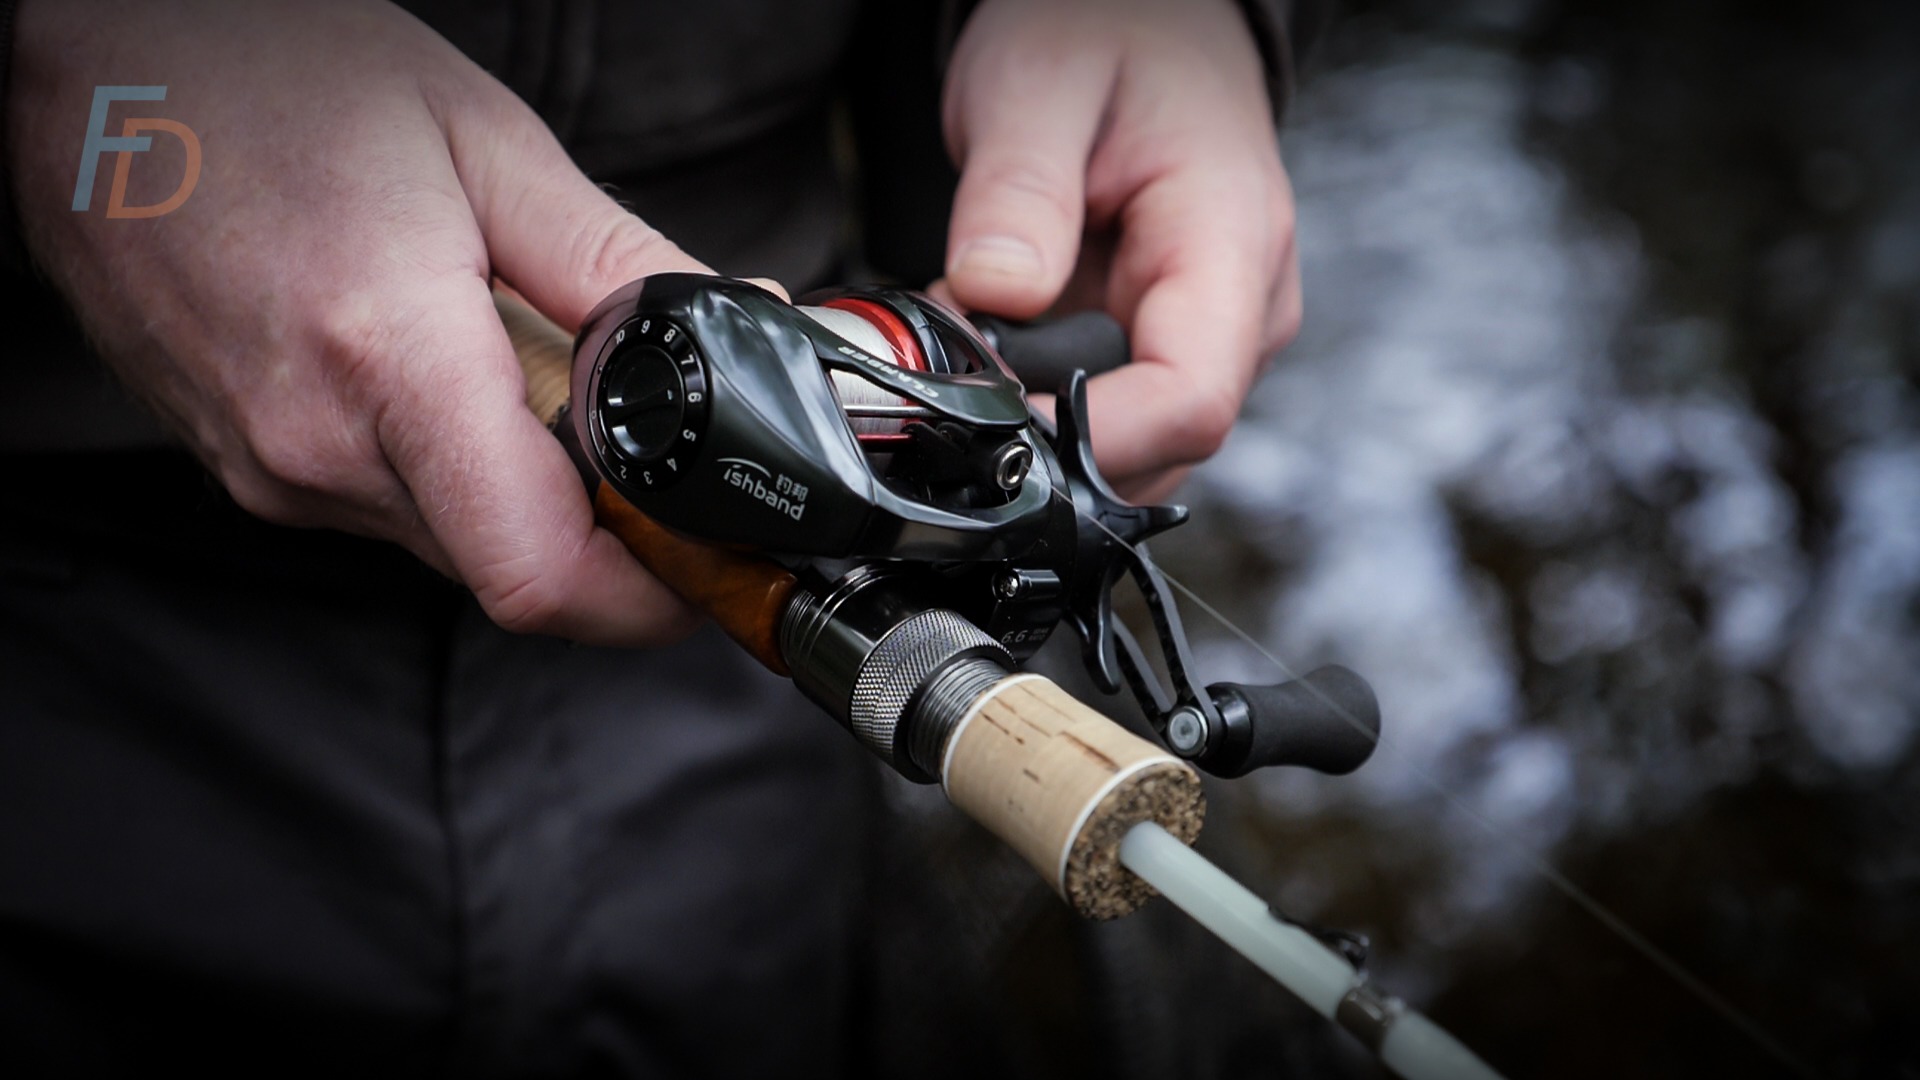 Our 5 Favorite Versatile Ultra Finesse Rods To Throw Tiny Bass